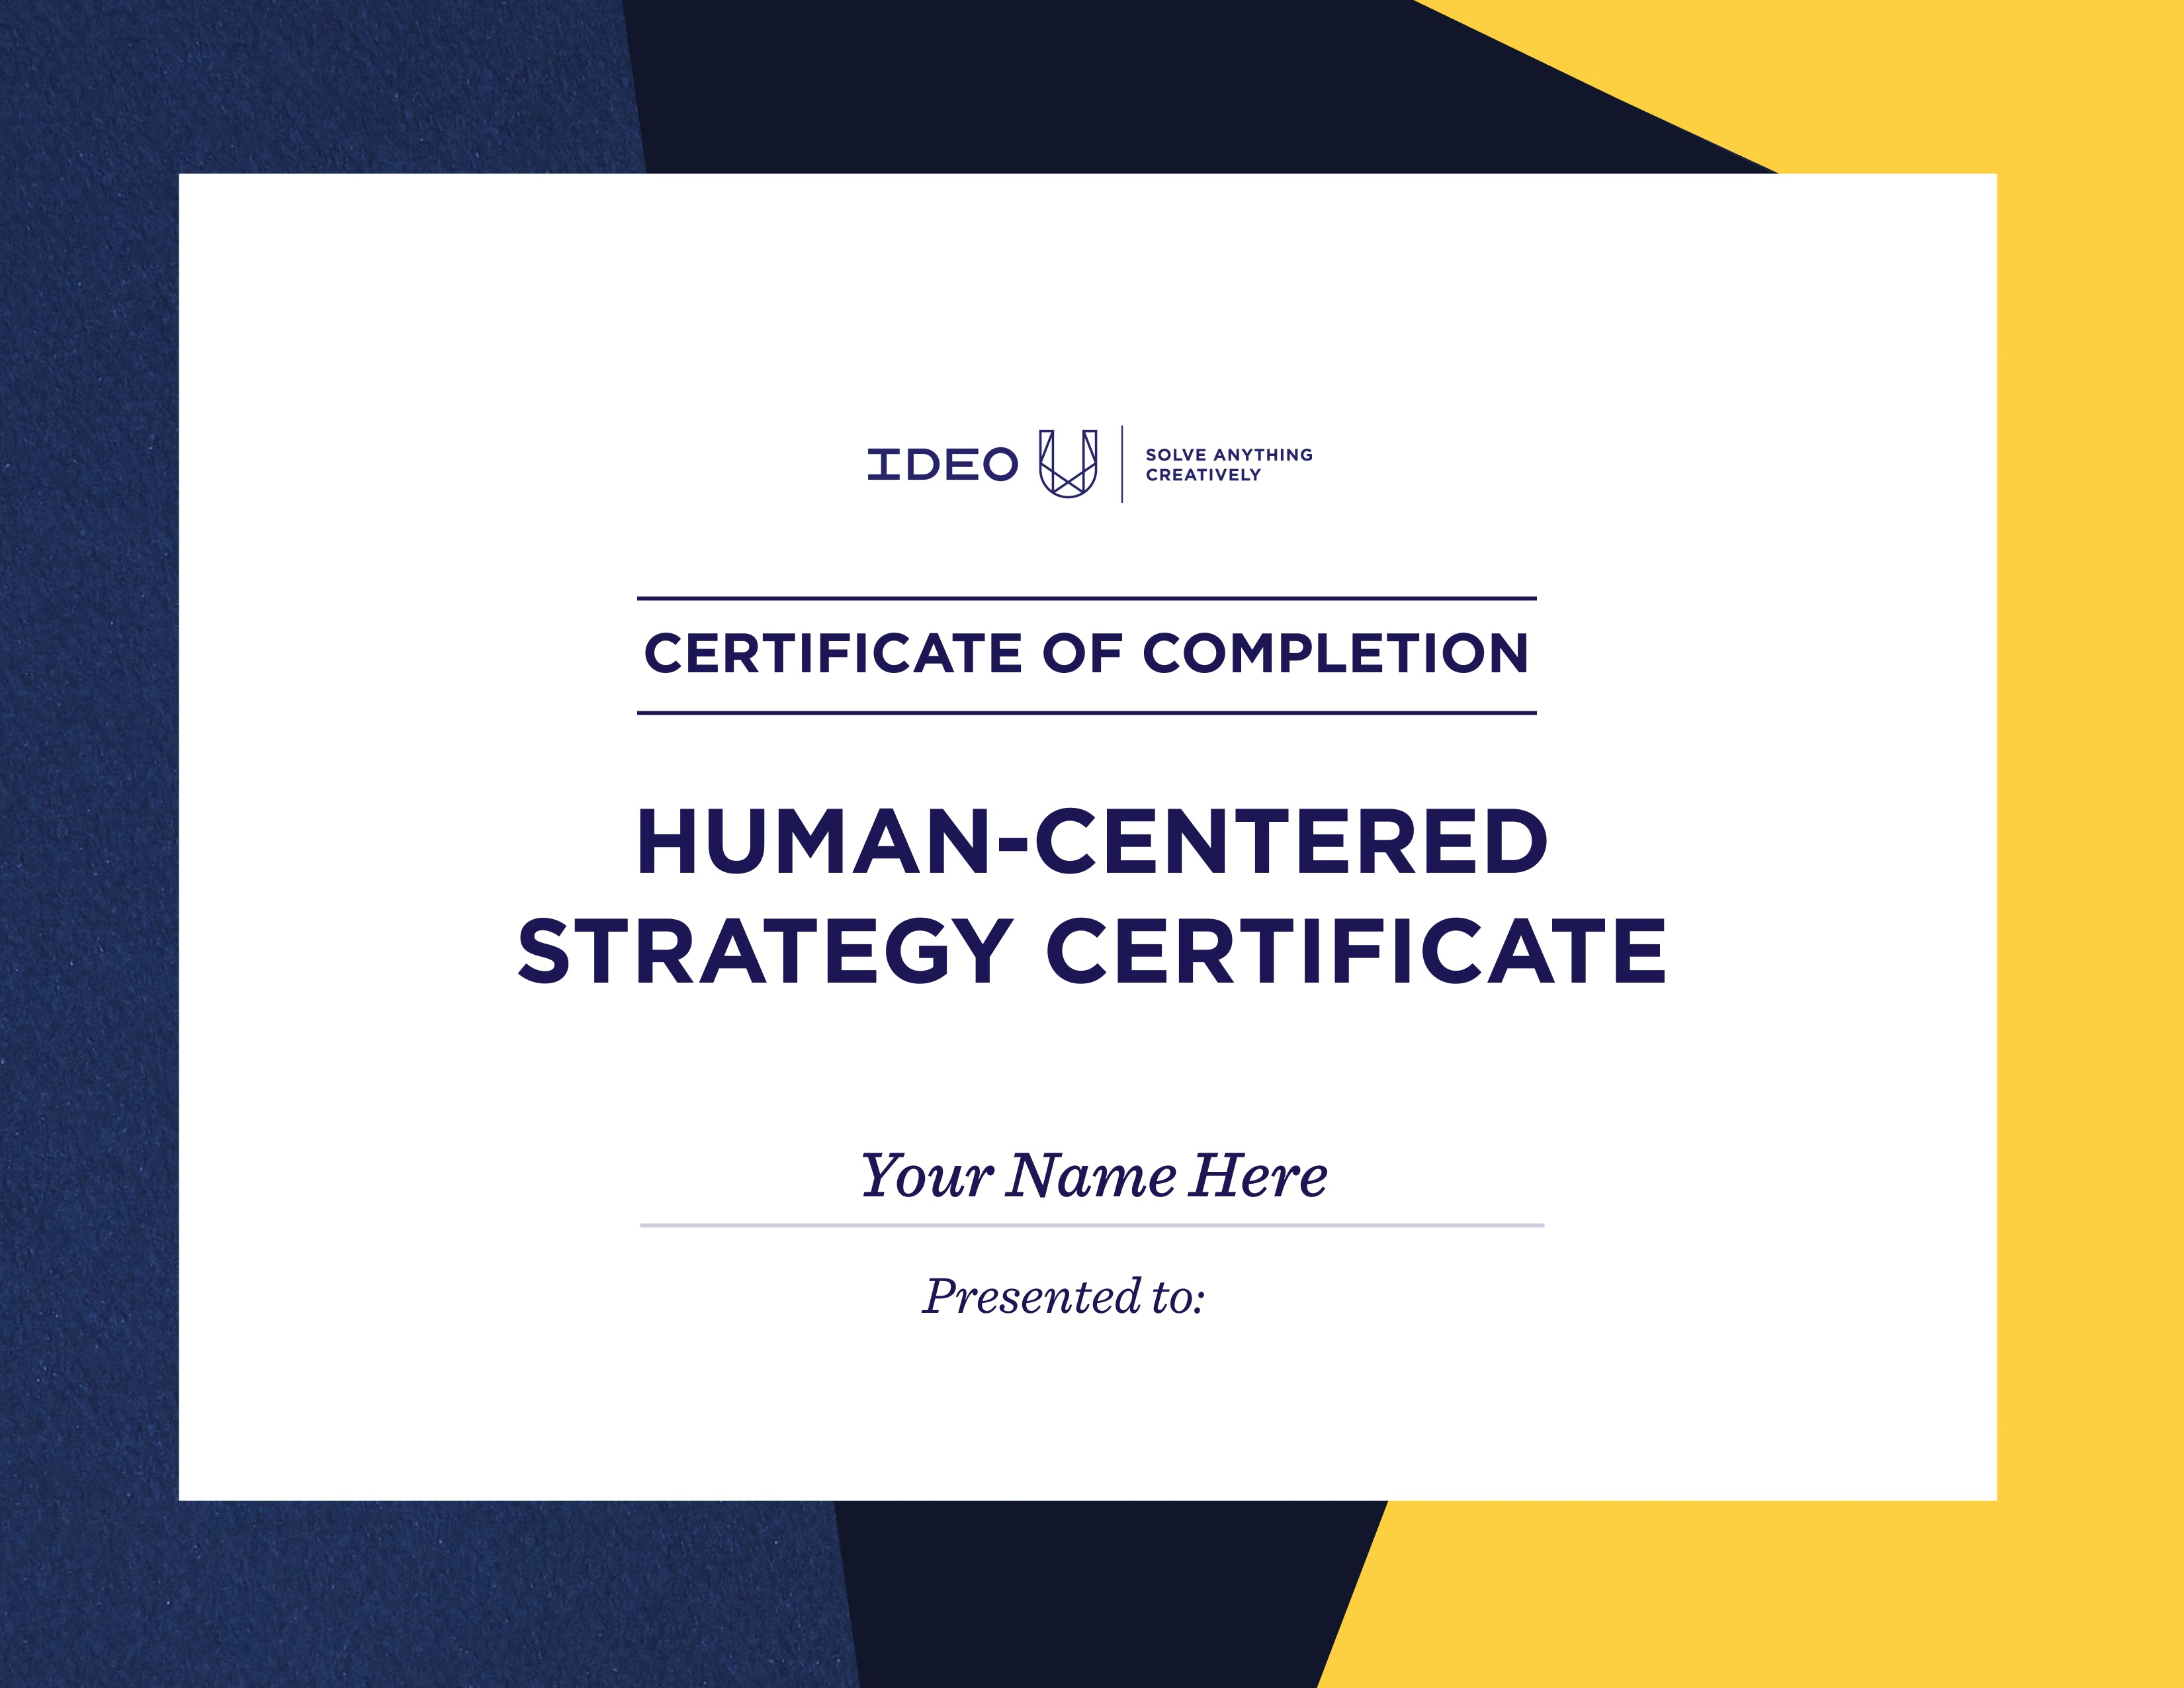 Your IDEO U Human-Centered Strategy Certificate